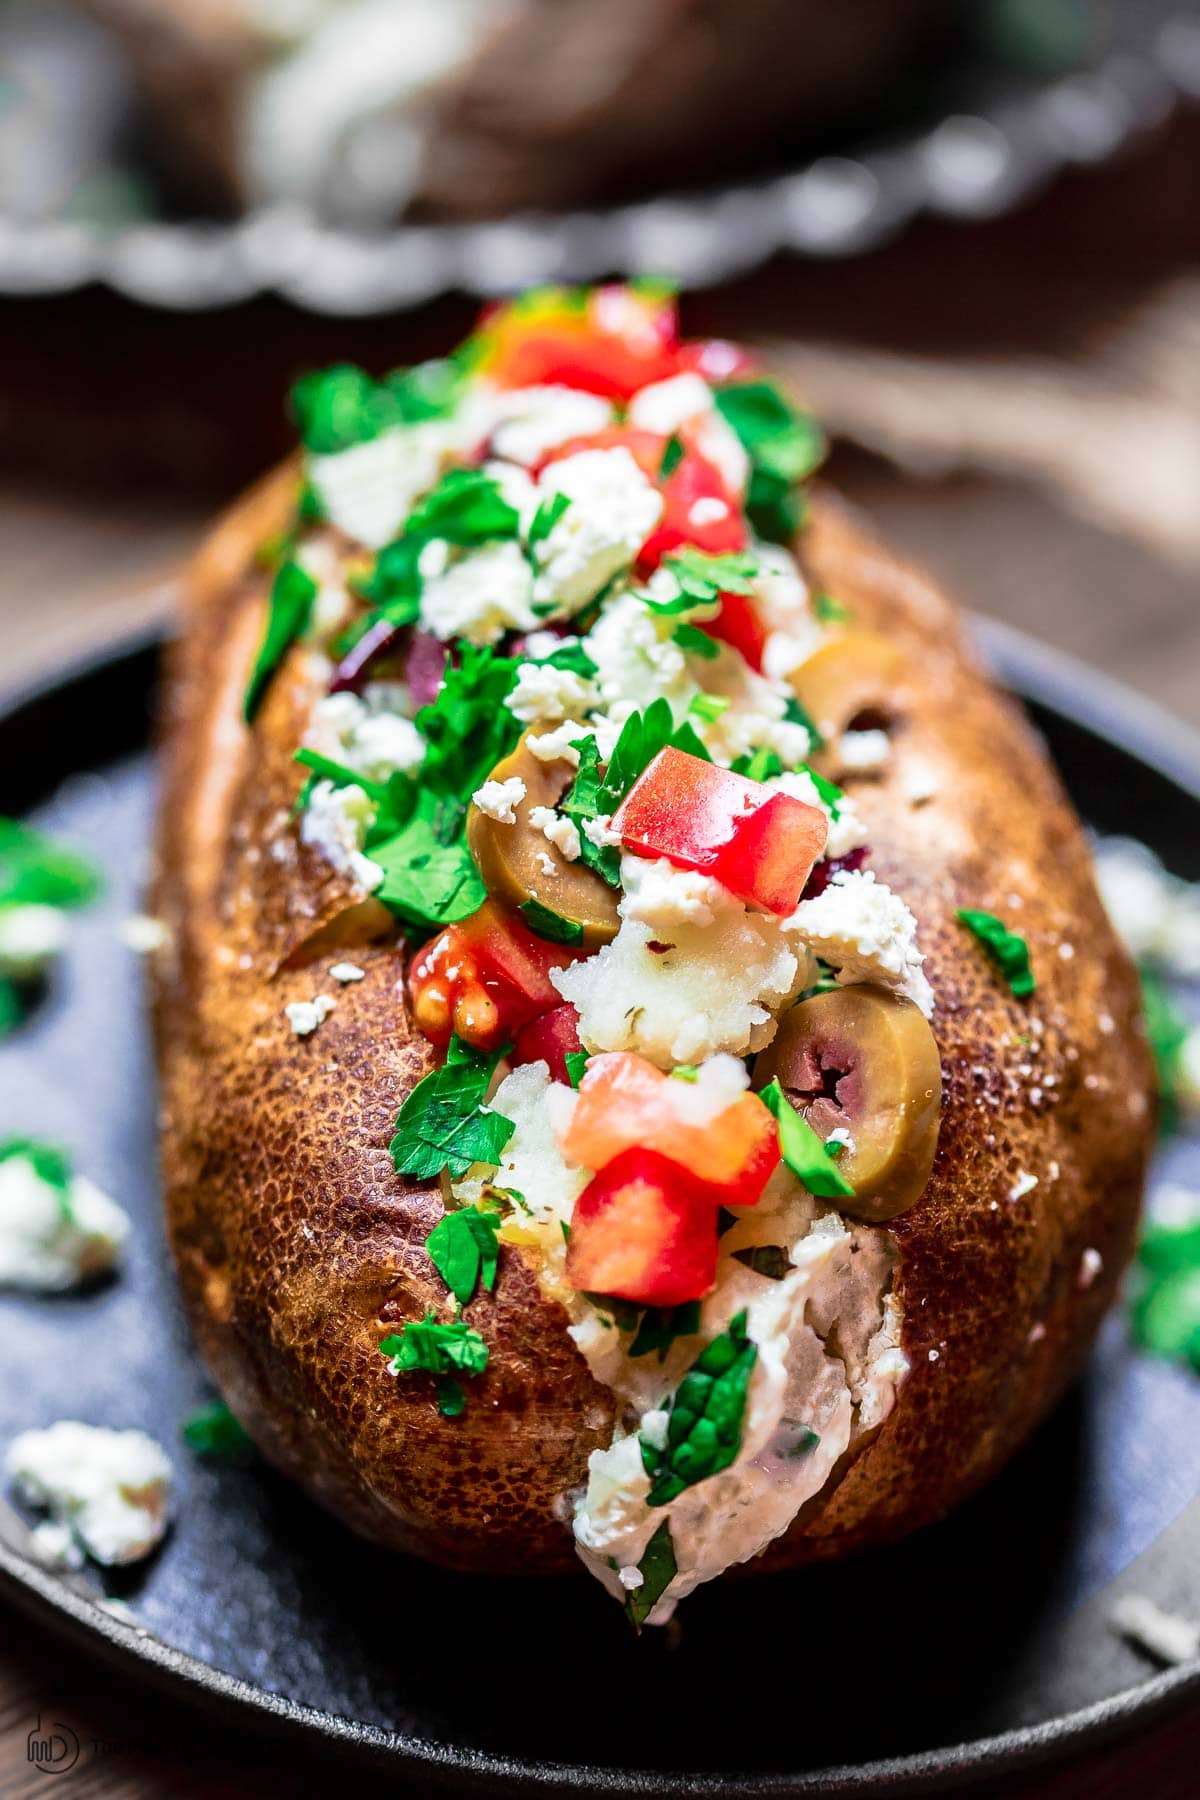 Loaded baked potato with Mediterranean toppings